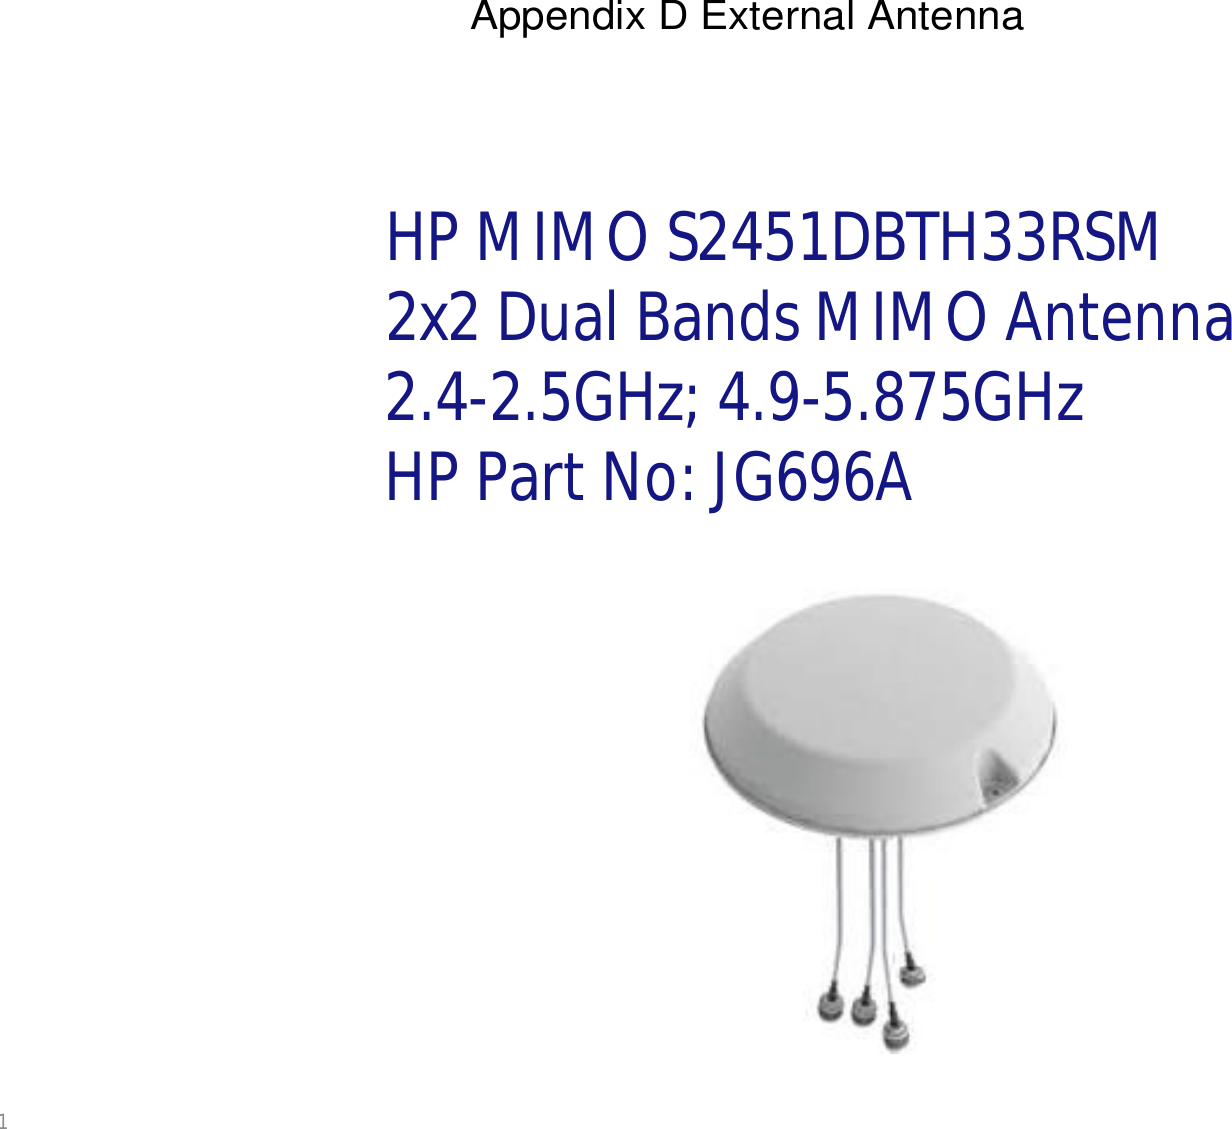 1 HP MIMO S2451DBTH33RSM2x2 Dual Bands MIMO Antenna2.4-2.5GHz; 4.9-5.875GHzHP Part No: JG696AAppendix C Built-in antennaAppendix C Built-in antennaAppendix C Built-in antennaAppendix C Built-in antennaAppendix D External Antenna